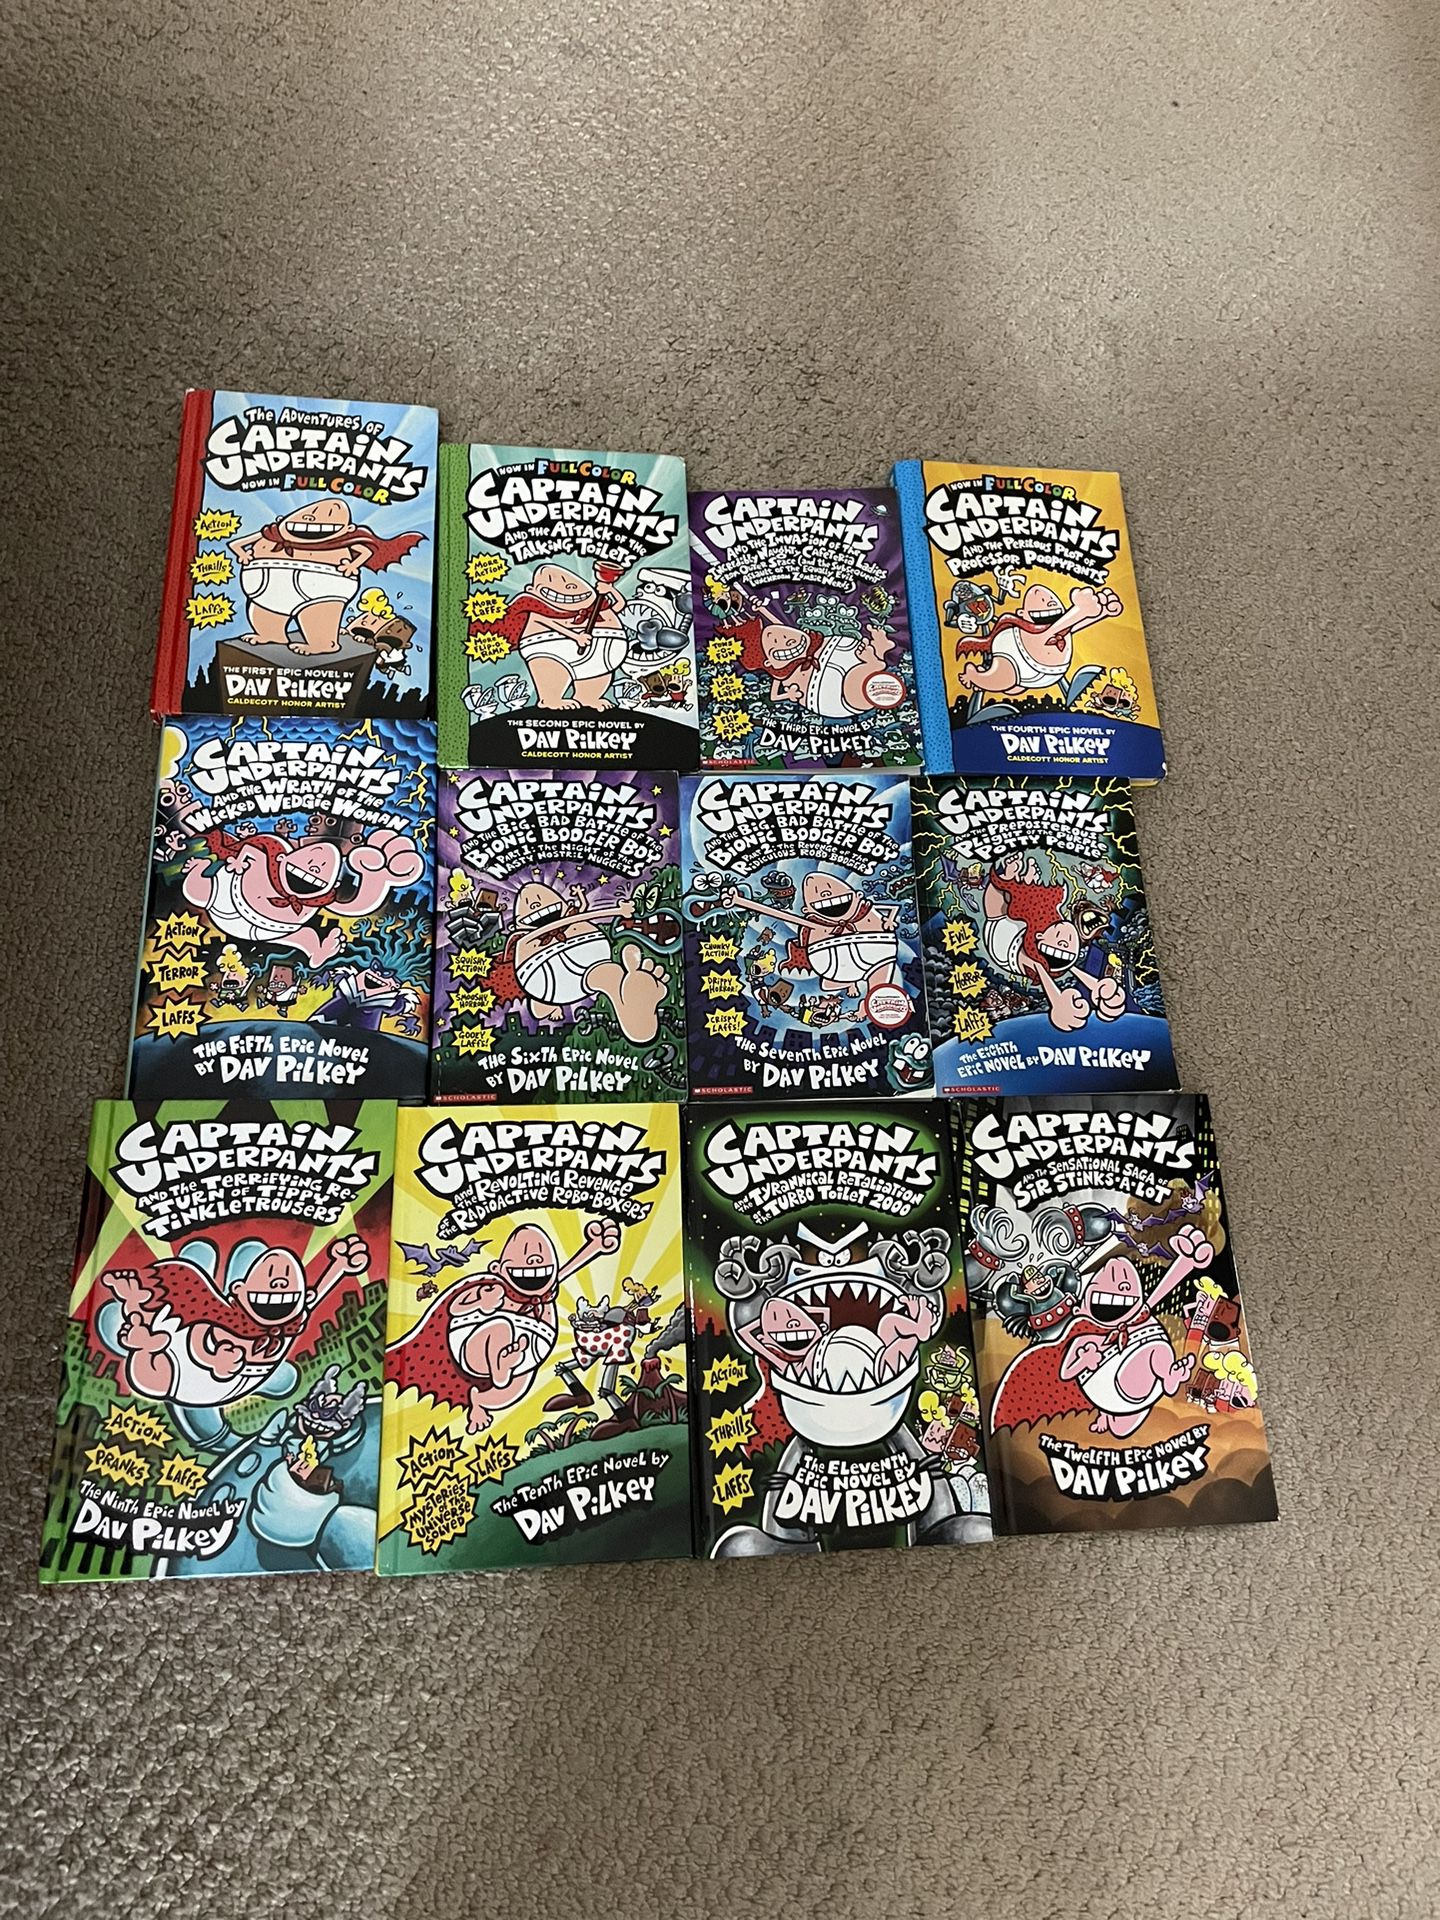 Captain Underpants Series #1-12 Color, Hardcover, Paperback, and Colorless